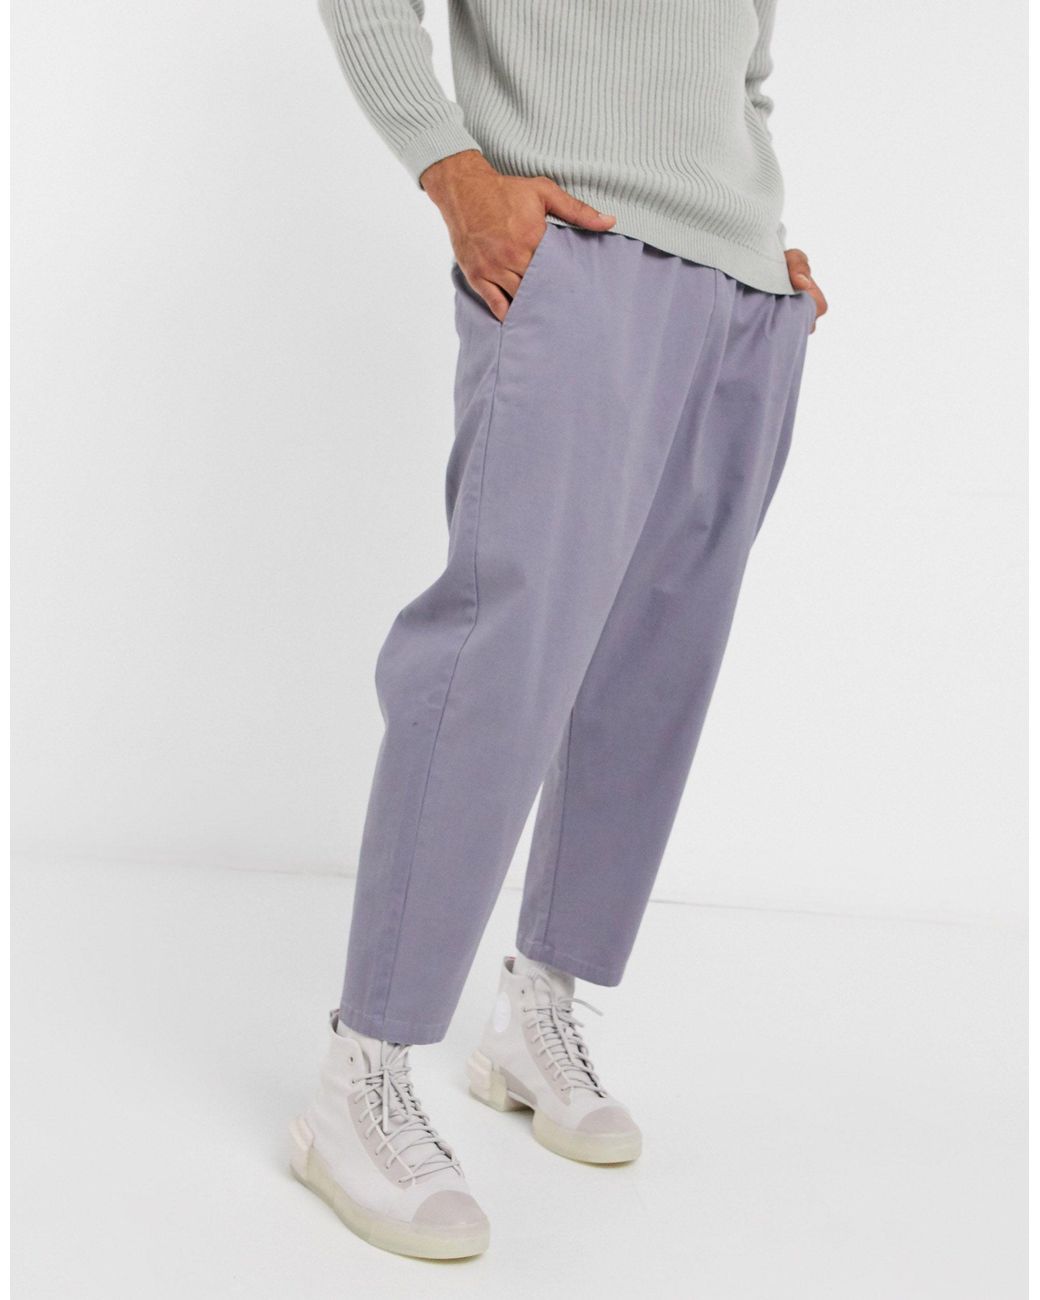 ASOS Crotch Chinos for Men | Lyst